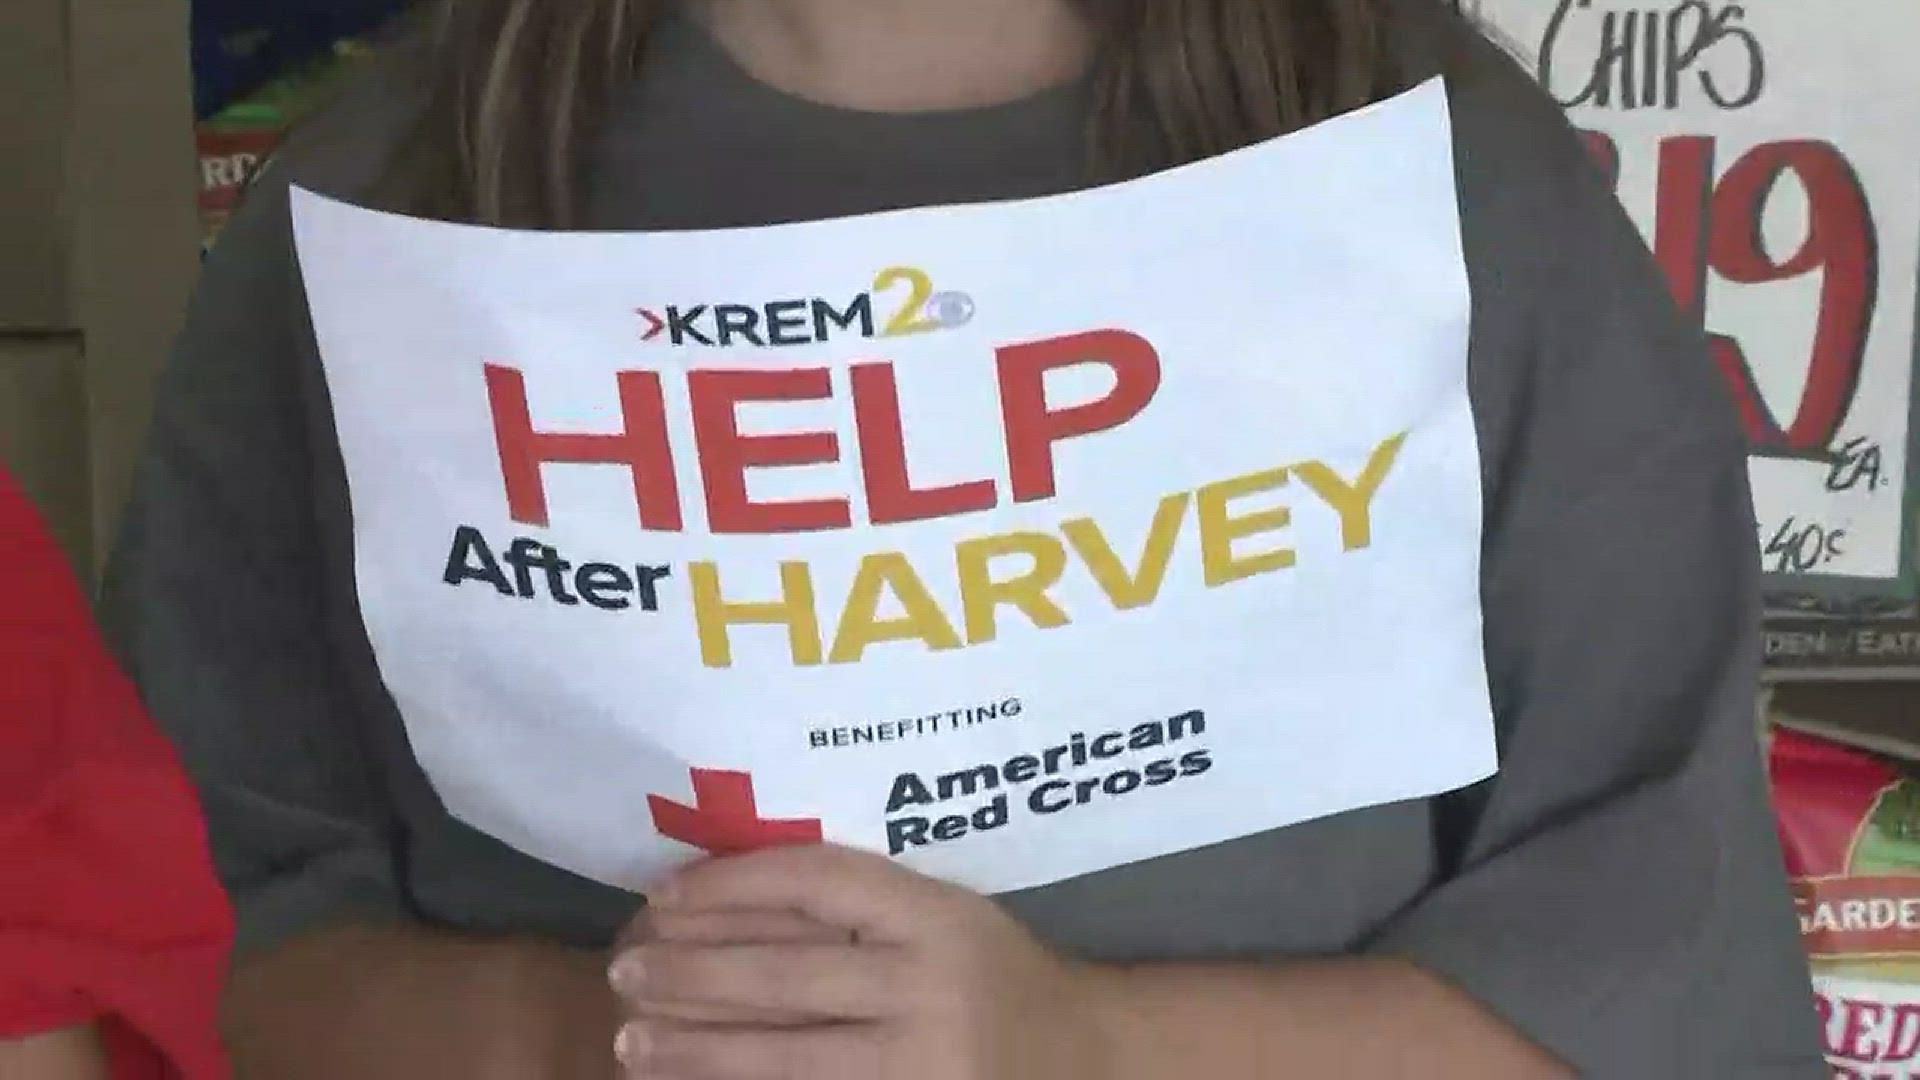 KREM 2's Laura Papetti is at Rosauer's for donations to help victims of Hurricane Harvey.